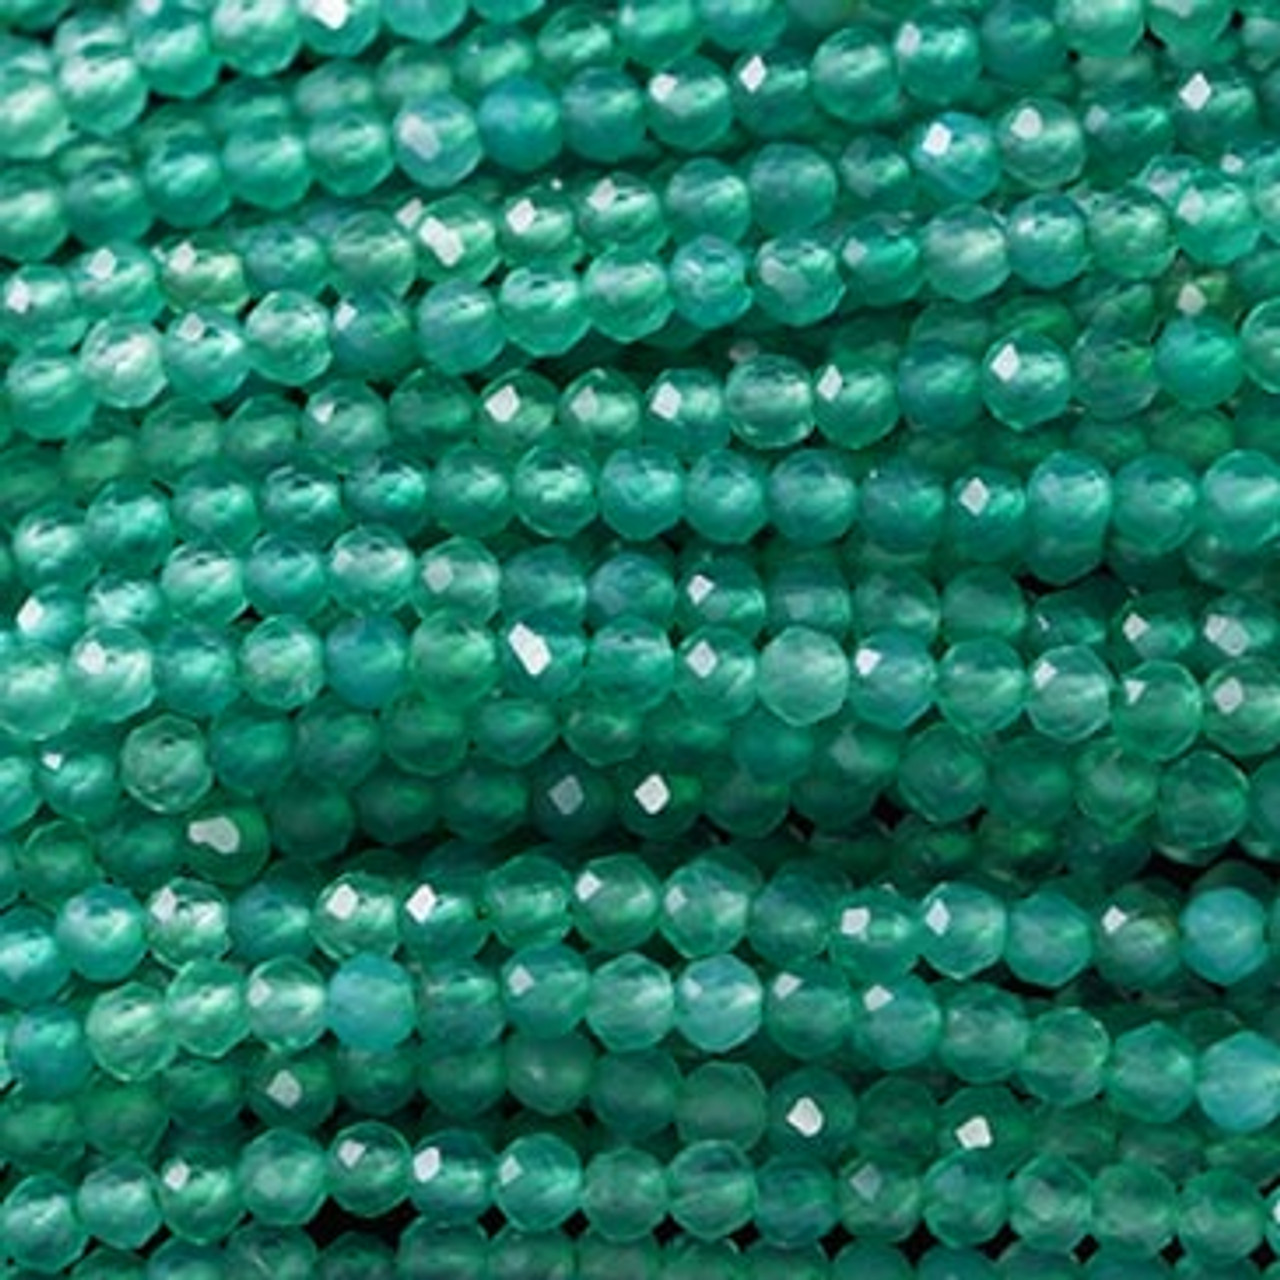 GREEN AGATE 3mm High Grade Faceted Gemstone Beads